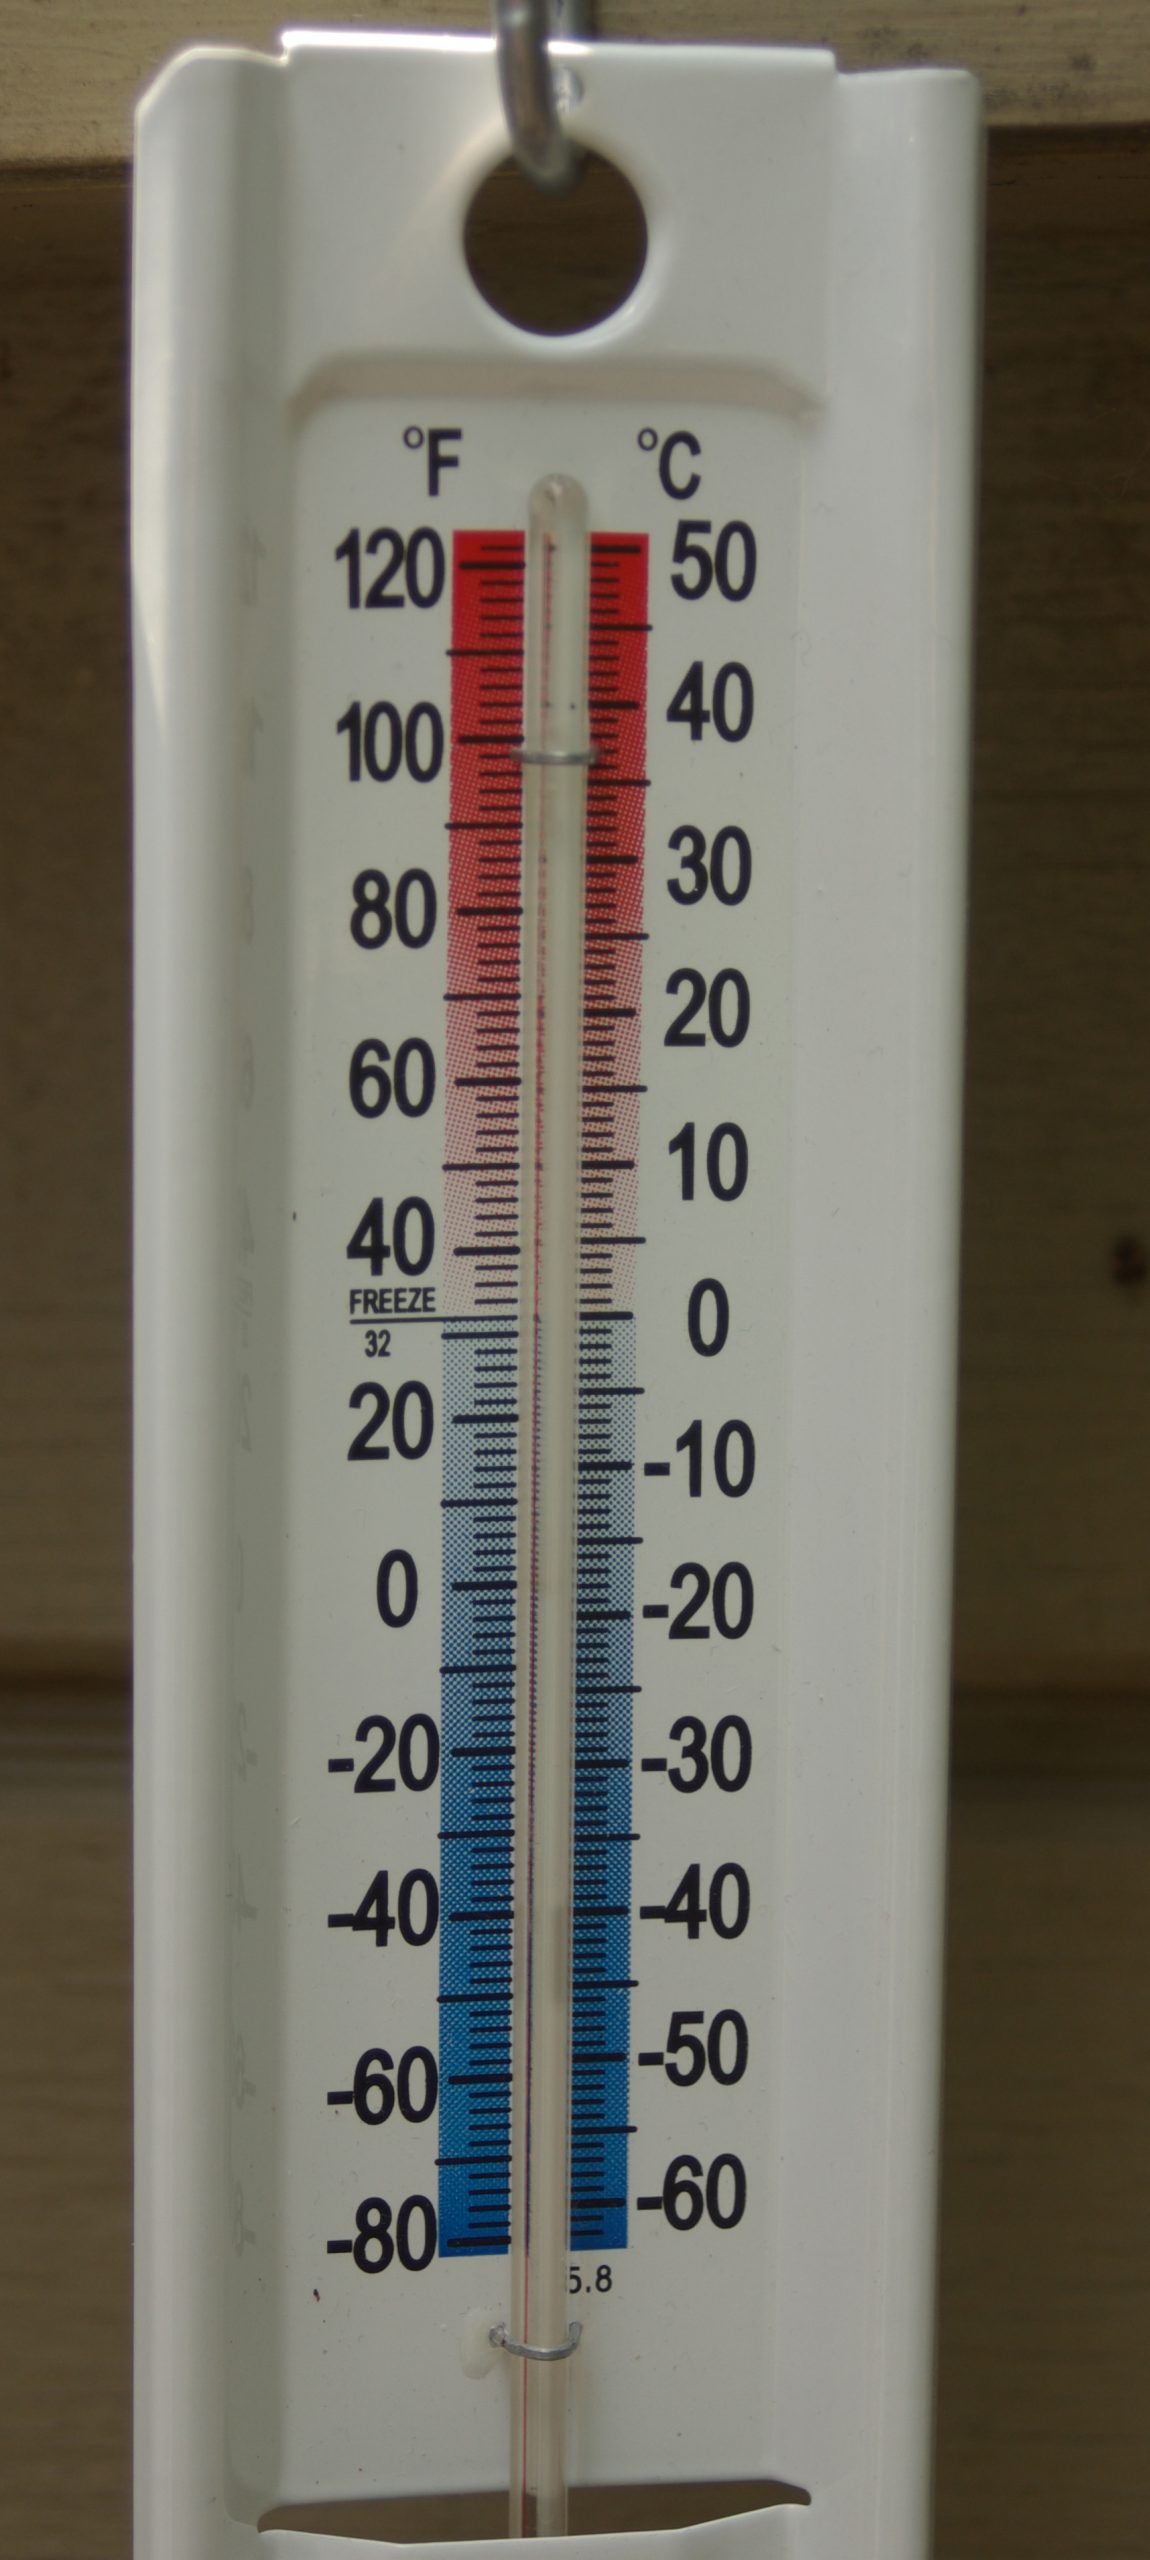 Thermometer showing measures in both centigrade and farenheit